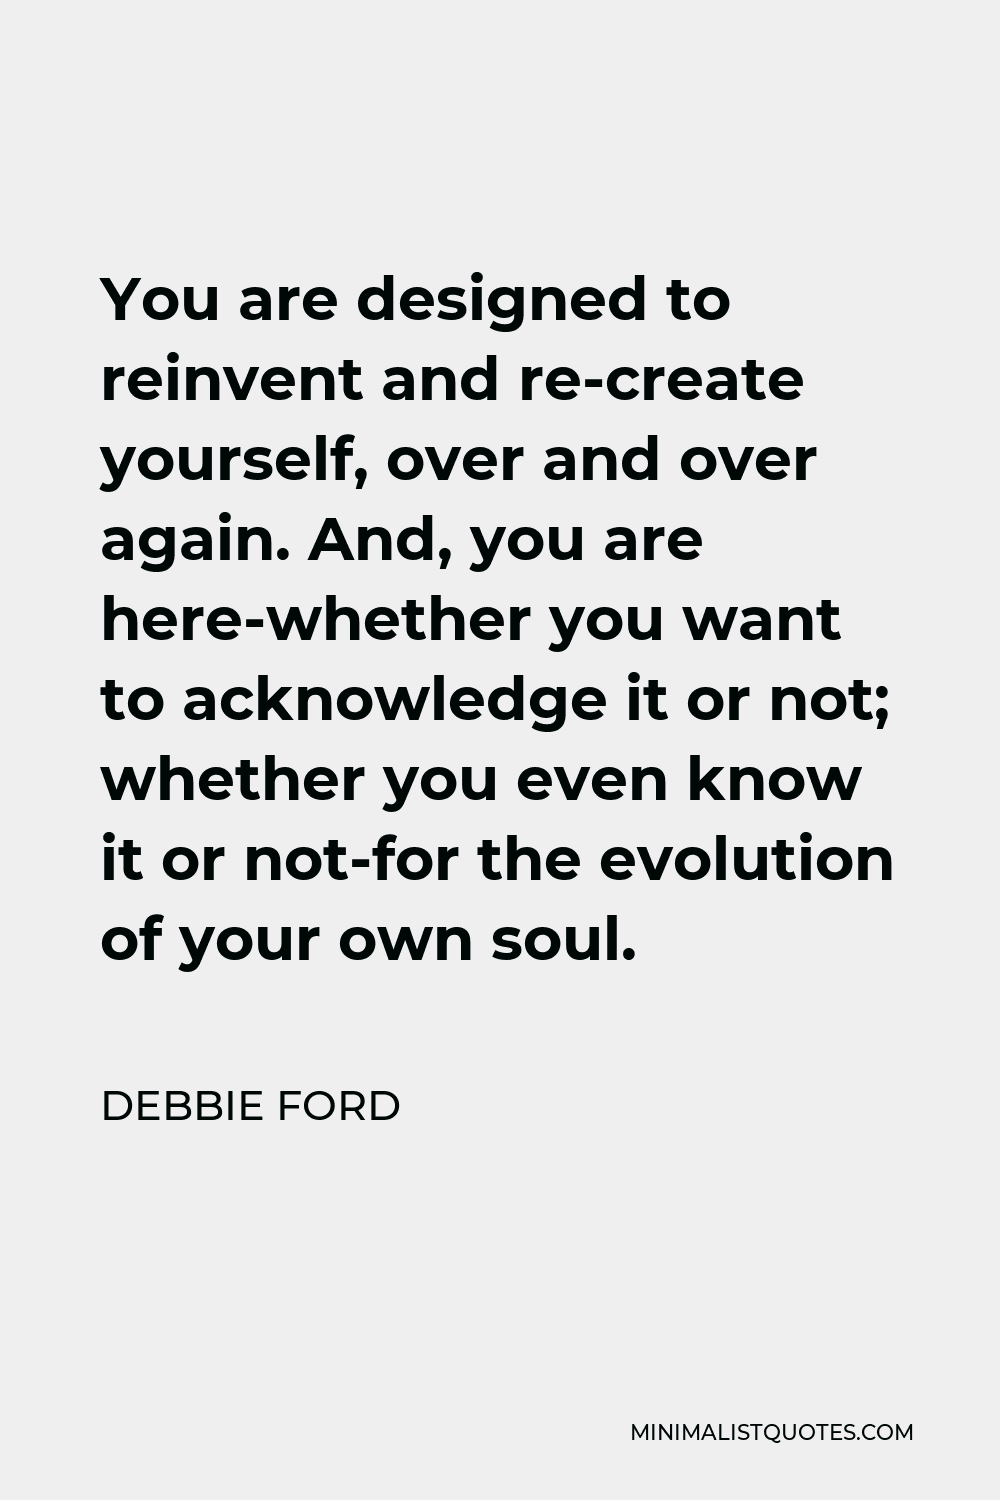 Debbie Ford Quote - You are designed to reinvent and re-create yourself, over and over again. And, you are here-whether you want to acknowledge it or not; whether you even know it or not-for the evolution of your own soul.